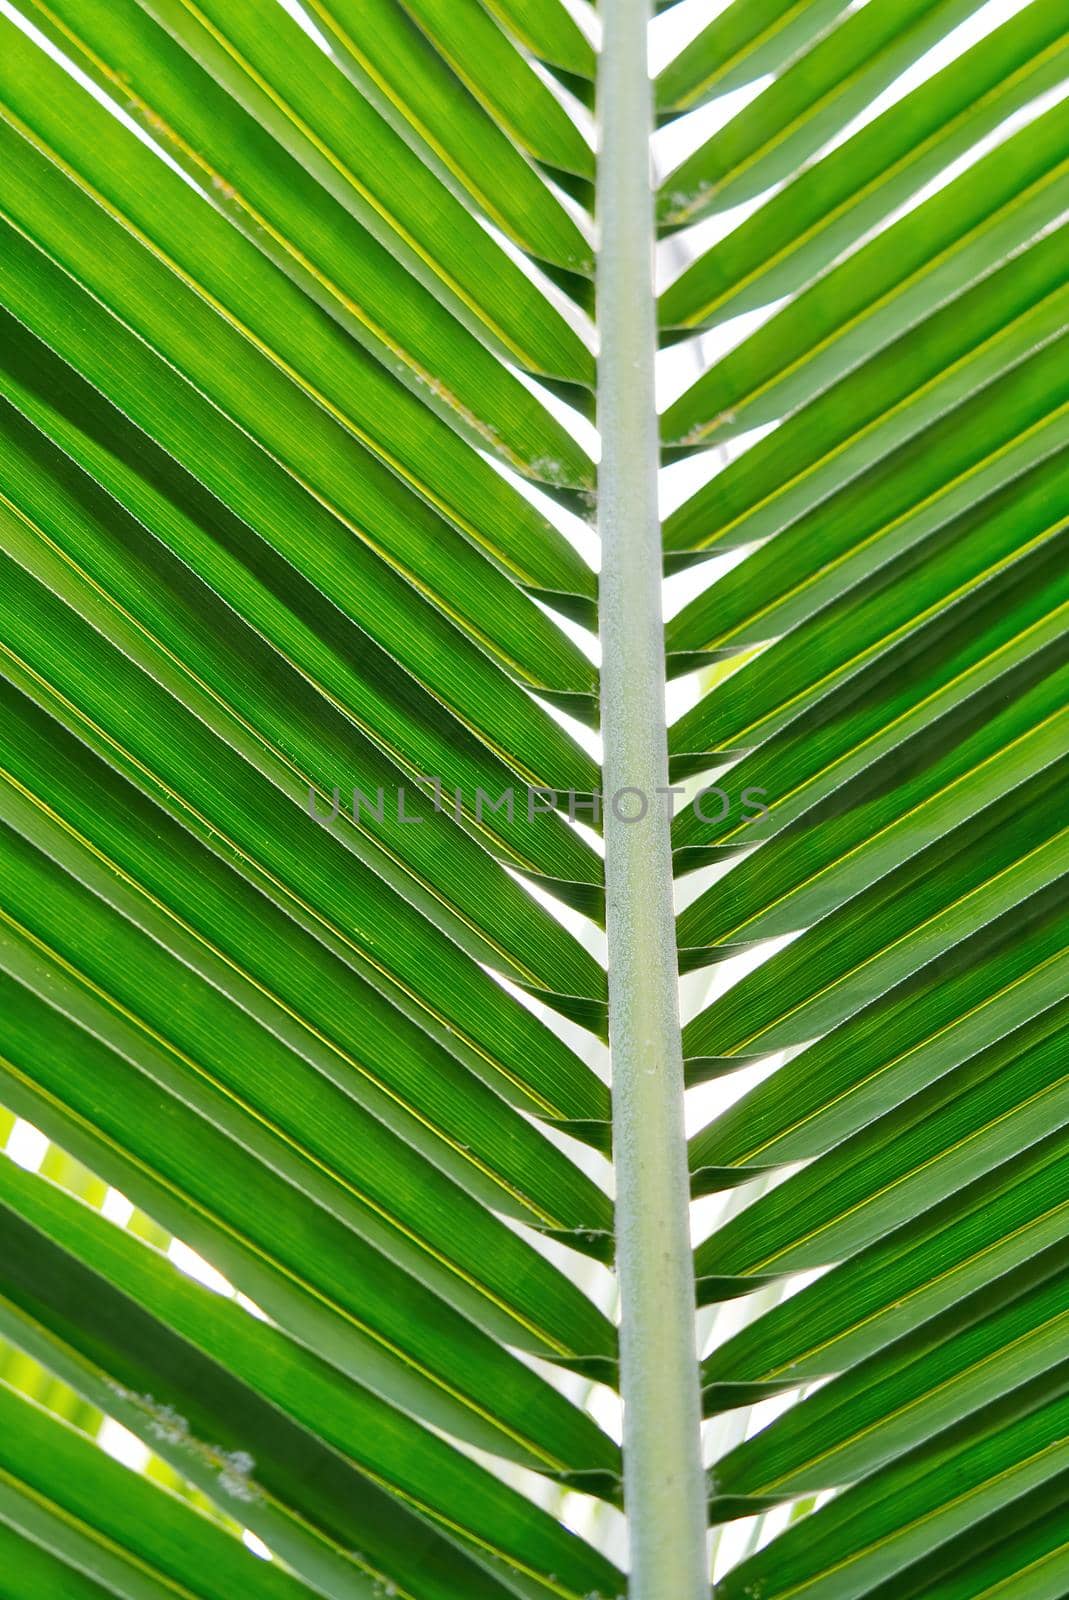 Striped of palm leaf, Abstract tropical green texture background, Vintage tone by PhotoTime